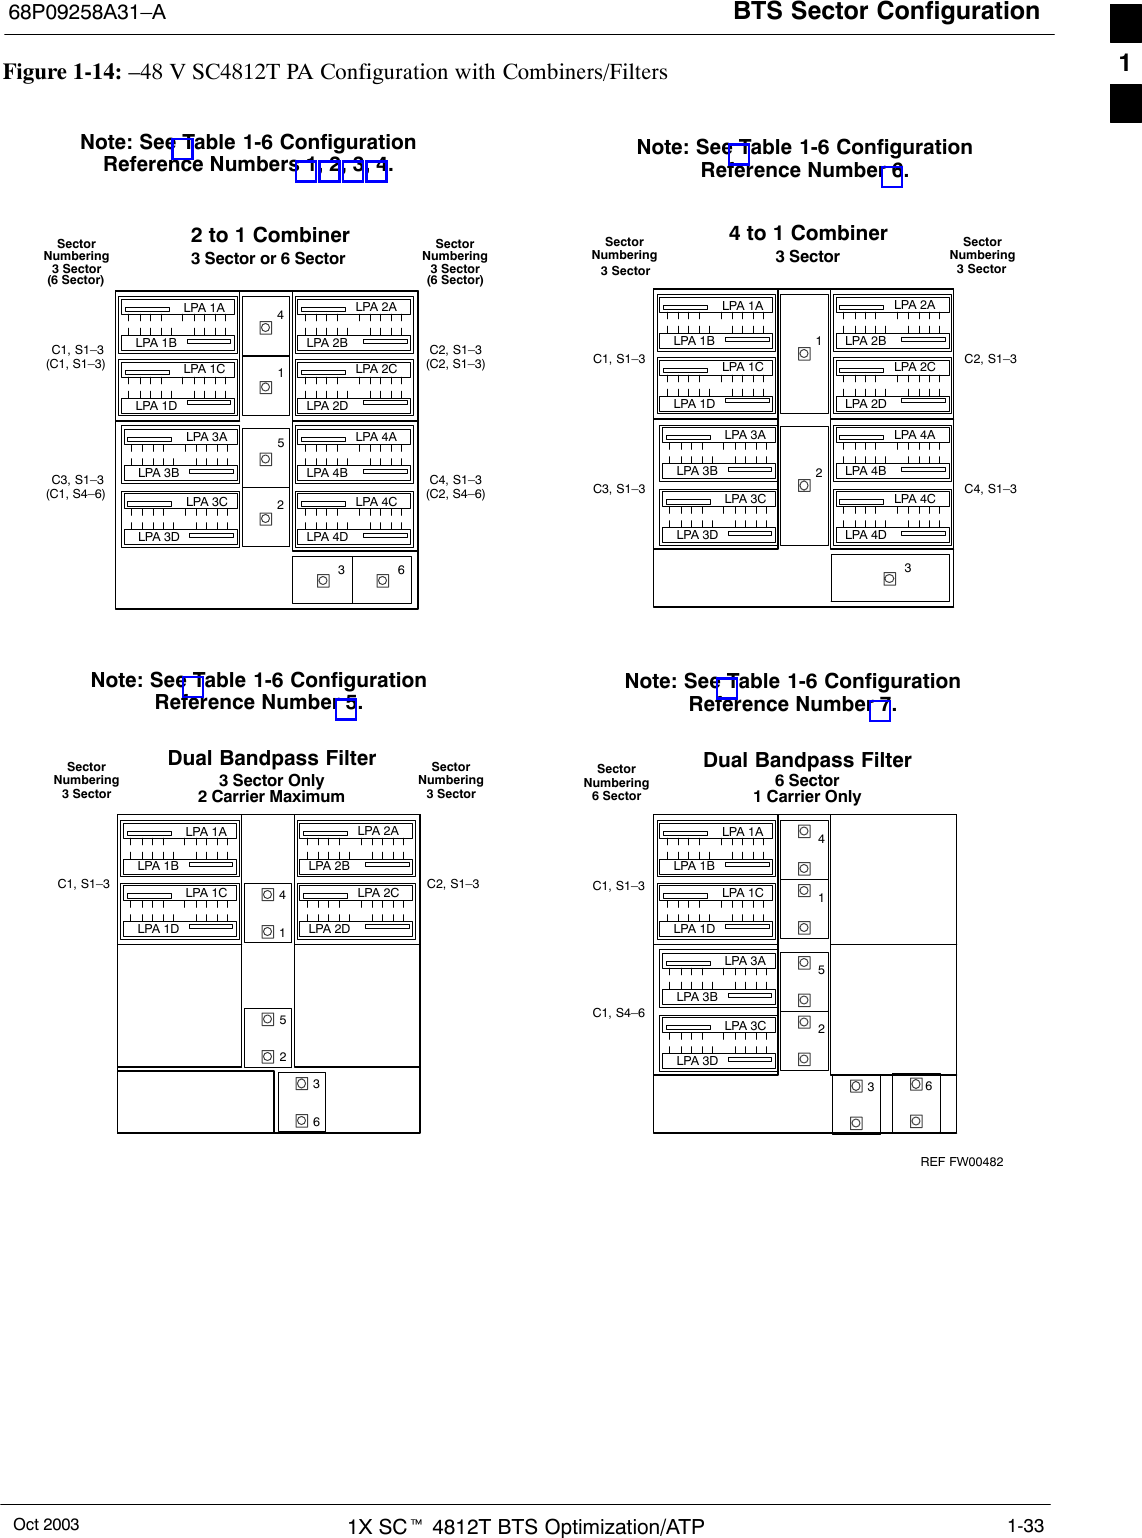 BTS Sector Configuration68P09258A31–AOct 2003 1X SCt 4812T BTS Optimization/ATP 1-33Figure 1-14: –48 V SC4812T PA Configuration with Combiners/FiltersNote: See Table 1-6 ConfigurationReference Numbers 1, 2, 3, 4. Note: See Table 1-6 ConfigurationReference Number 6.Note: See Table 1-6 ConfigurationReference Number 5.Note: See Table 1-6 ConfigurationReference Number 7.REF FW00482415236NumberingSector3 SectorSector3 Sector(6 Sector)Numbering2 to 1 Combiner3 Sector or 6 SectorC1, S1–3(C1, S1–3)C2, S1–3(C2, S1–3)C3, S1–3(C1, S4–6)C4, S1–3(C2, S4–6)(6 Sector)LPA 1ALPA 1BLPA 1CLPA 1DLPA 3CLPA 3ALPA 3BLPA 3DLPA 2DLPA 2CLPA 2BLPA 2ALPA 4BLPA 4ALPA 4CLPA 4DSectorNumberingSectorNumbering4 to 1 Combiner3 SectorC1, S1–3 C2, S1–3C3, S1–3 C4, S1–3LPA 1ALPA 1B 13LPA 1CLPA 1DLPA 3CLPA 3ALPA 3BLPA 3DLPA 2DLPA 2CLPA 2BLPA 2ALPA 4BLPA 4ALPA 4CLPA 4D2LPA 1ALPA 1BLPA 1CLPA 1D LPA 2DLPA 2CLPA 2BLPA 2A45Sector3 SectorNumberingSector3 SectorNumberingDual Bandpass Filter3 Sector OnlyC1, S1–3 C2, S1–32 Carrier Maximum21361524LPA 1ALPA 1BLPA 1CLPA 1DLPA 3CLPA 3ALPA 3BLPA 3DSectorNumberingDual Bandpass Filter6 SectorC1, S1–3C1, S4–61 Carrier Only6 Sector3 Sector3 Sector361